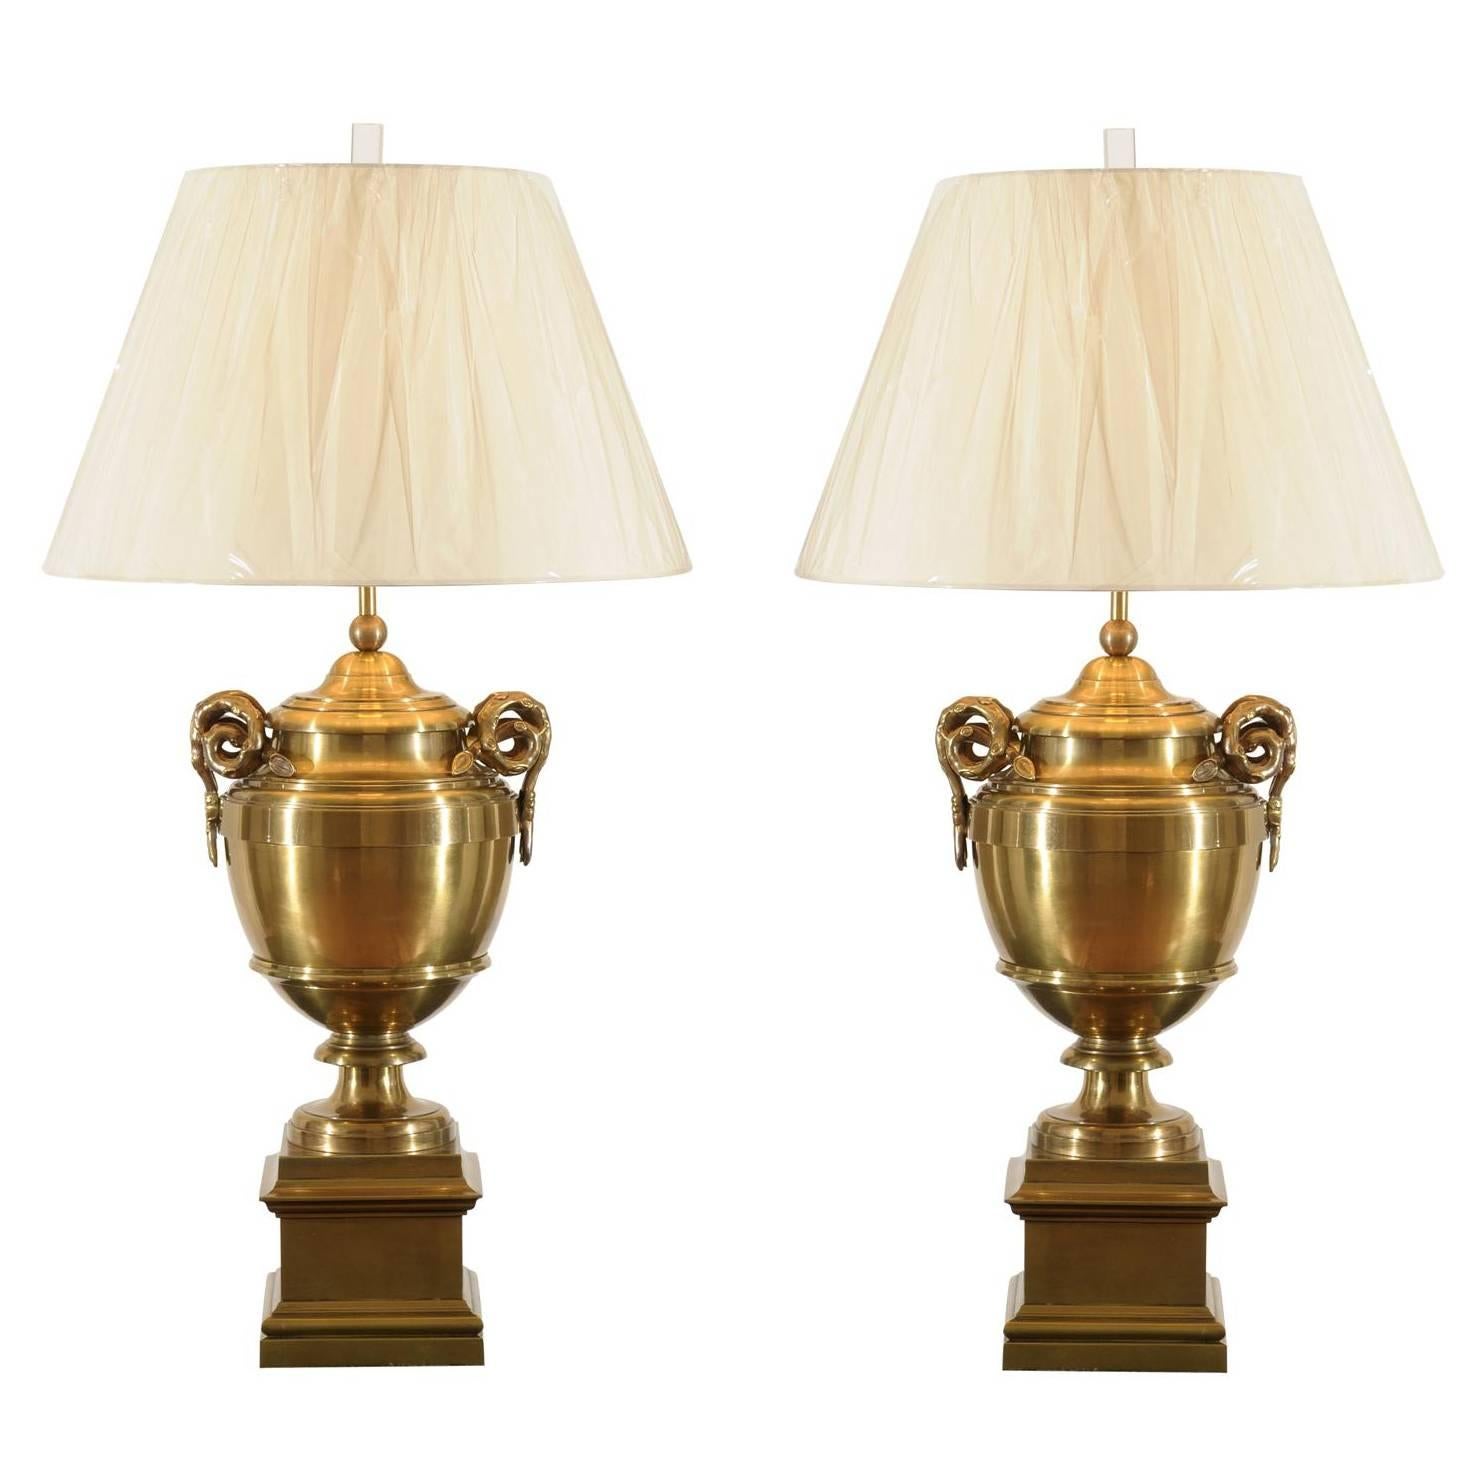 Exquisite Pair of Brass Urn Lamps in the Style of Maison Jansen For Sale